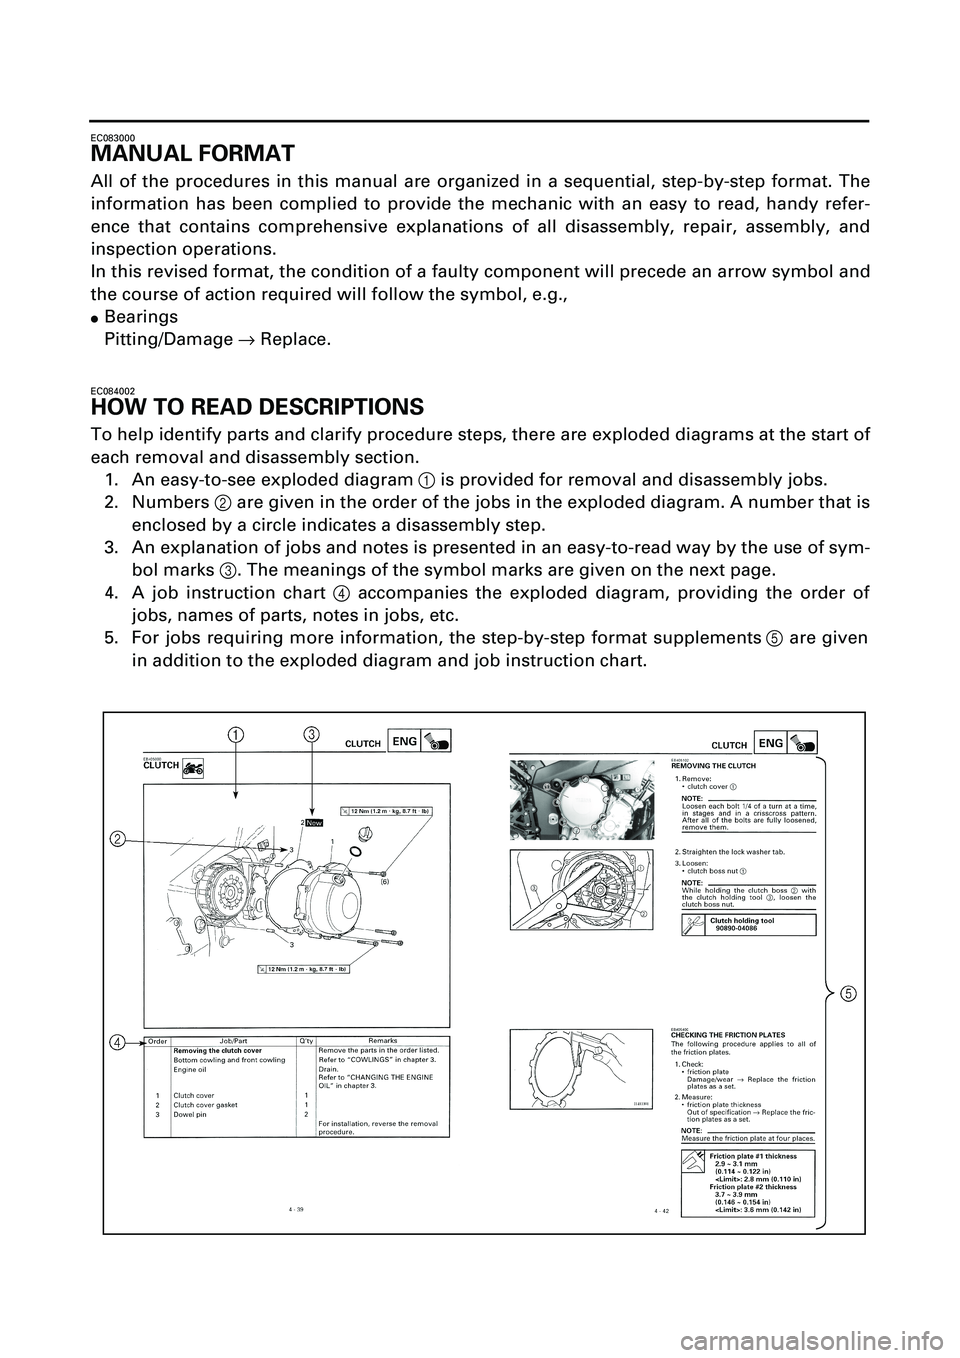 YAMAHA YZF-R7 1999  Owners Manual  
EC083000 
MANUAL FORMAT 
All of the procedures in this manual are organized in a sequential, step-by-step format. The
information has been complied to provide the mechanic with an easy to read, hand